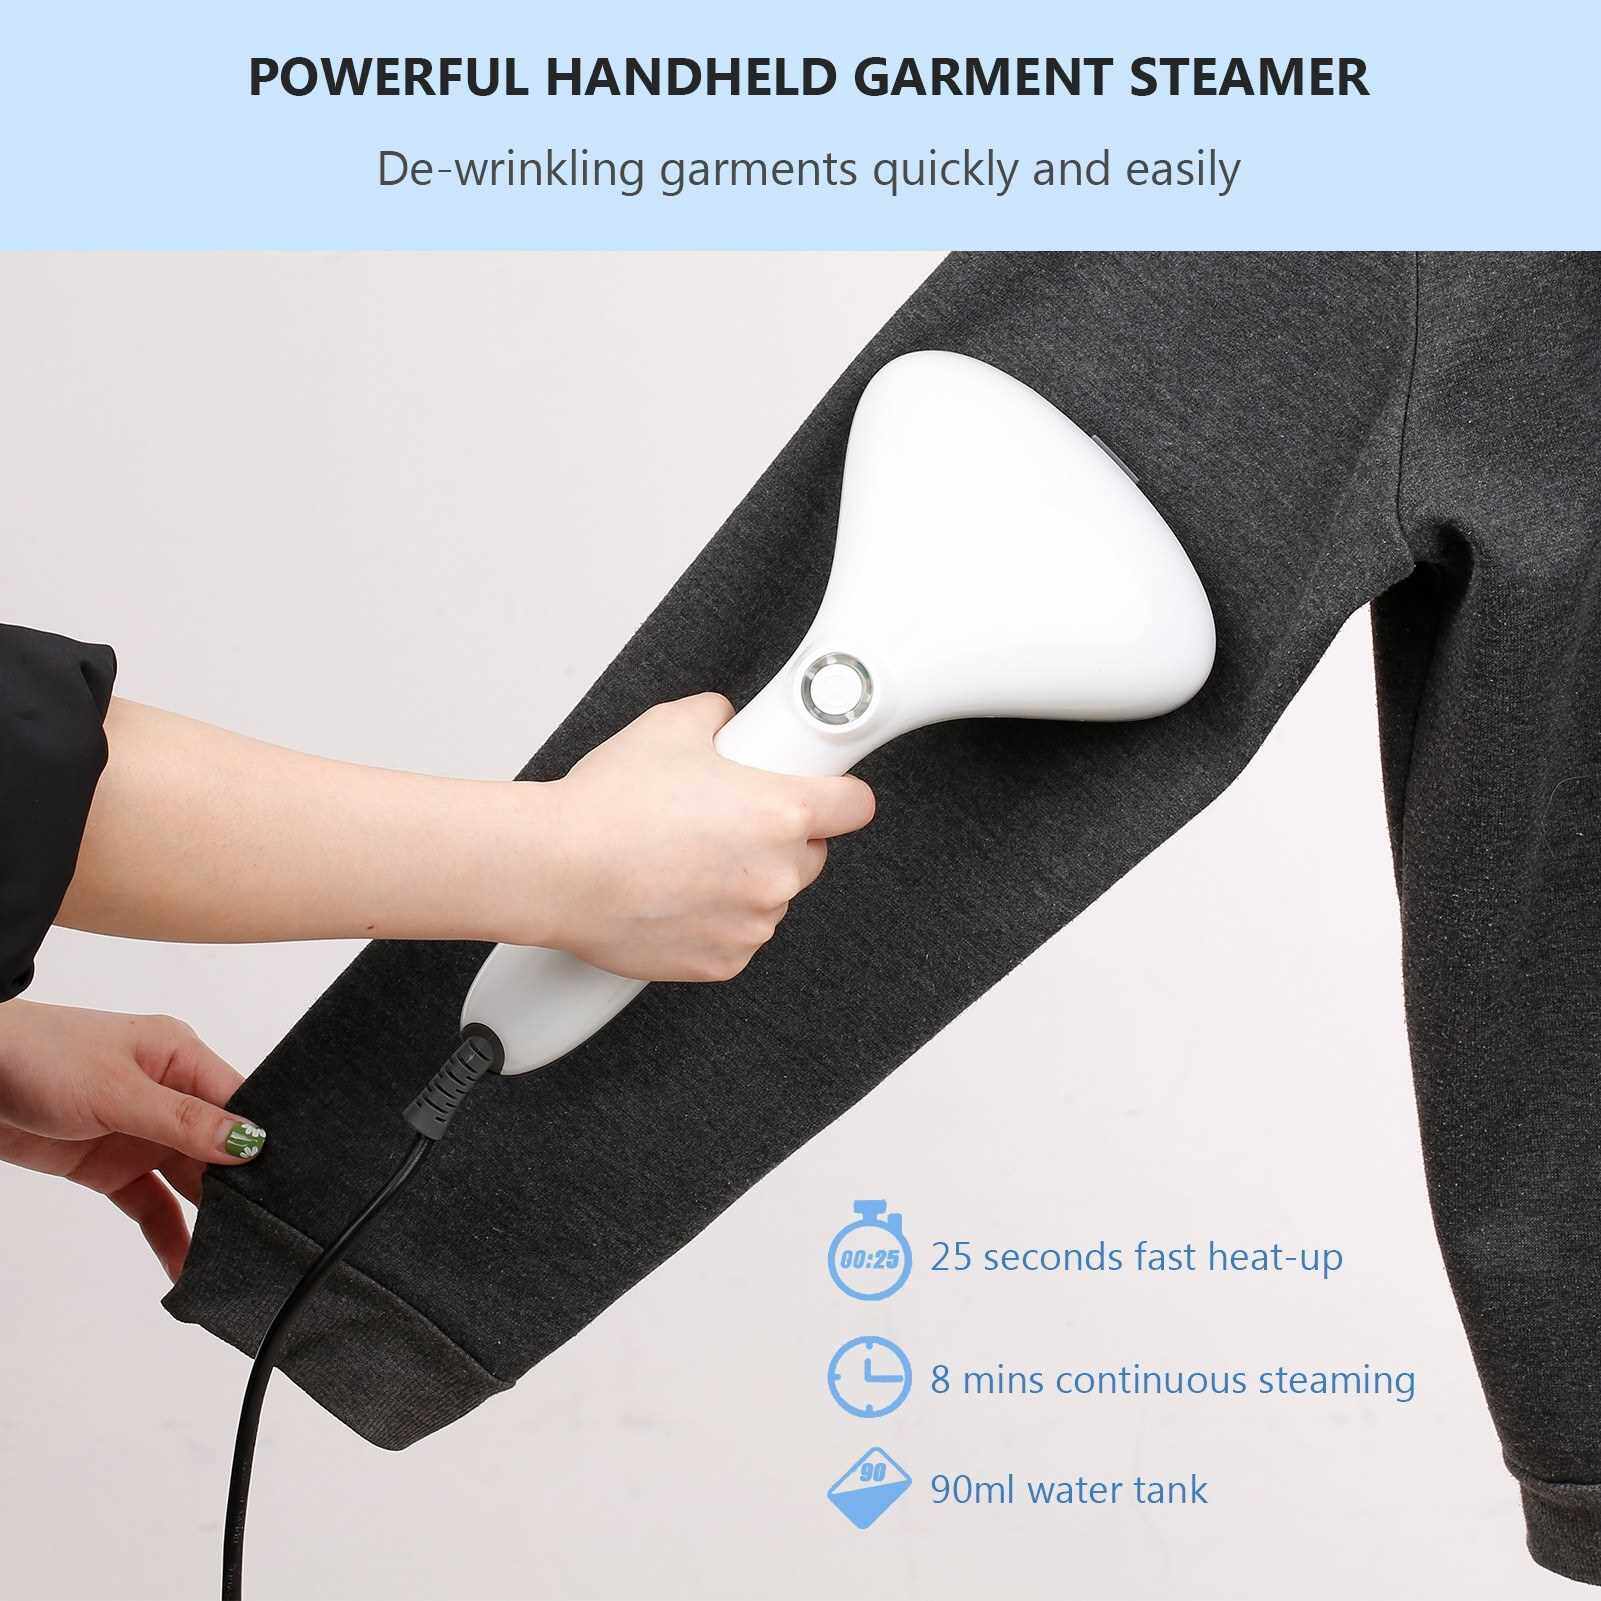 1500W Garment Steamer Portable Handheld Fabric Steamer Wrinkle Remover Clothing Steamer 90ml Capacity Detachable Water Tank 25s Fast Heat-up Ironing Machine for Travel and Home Use (Beige)